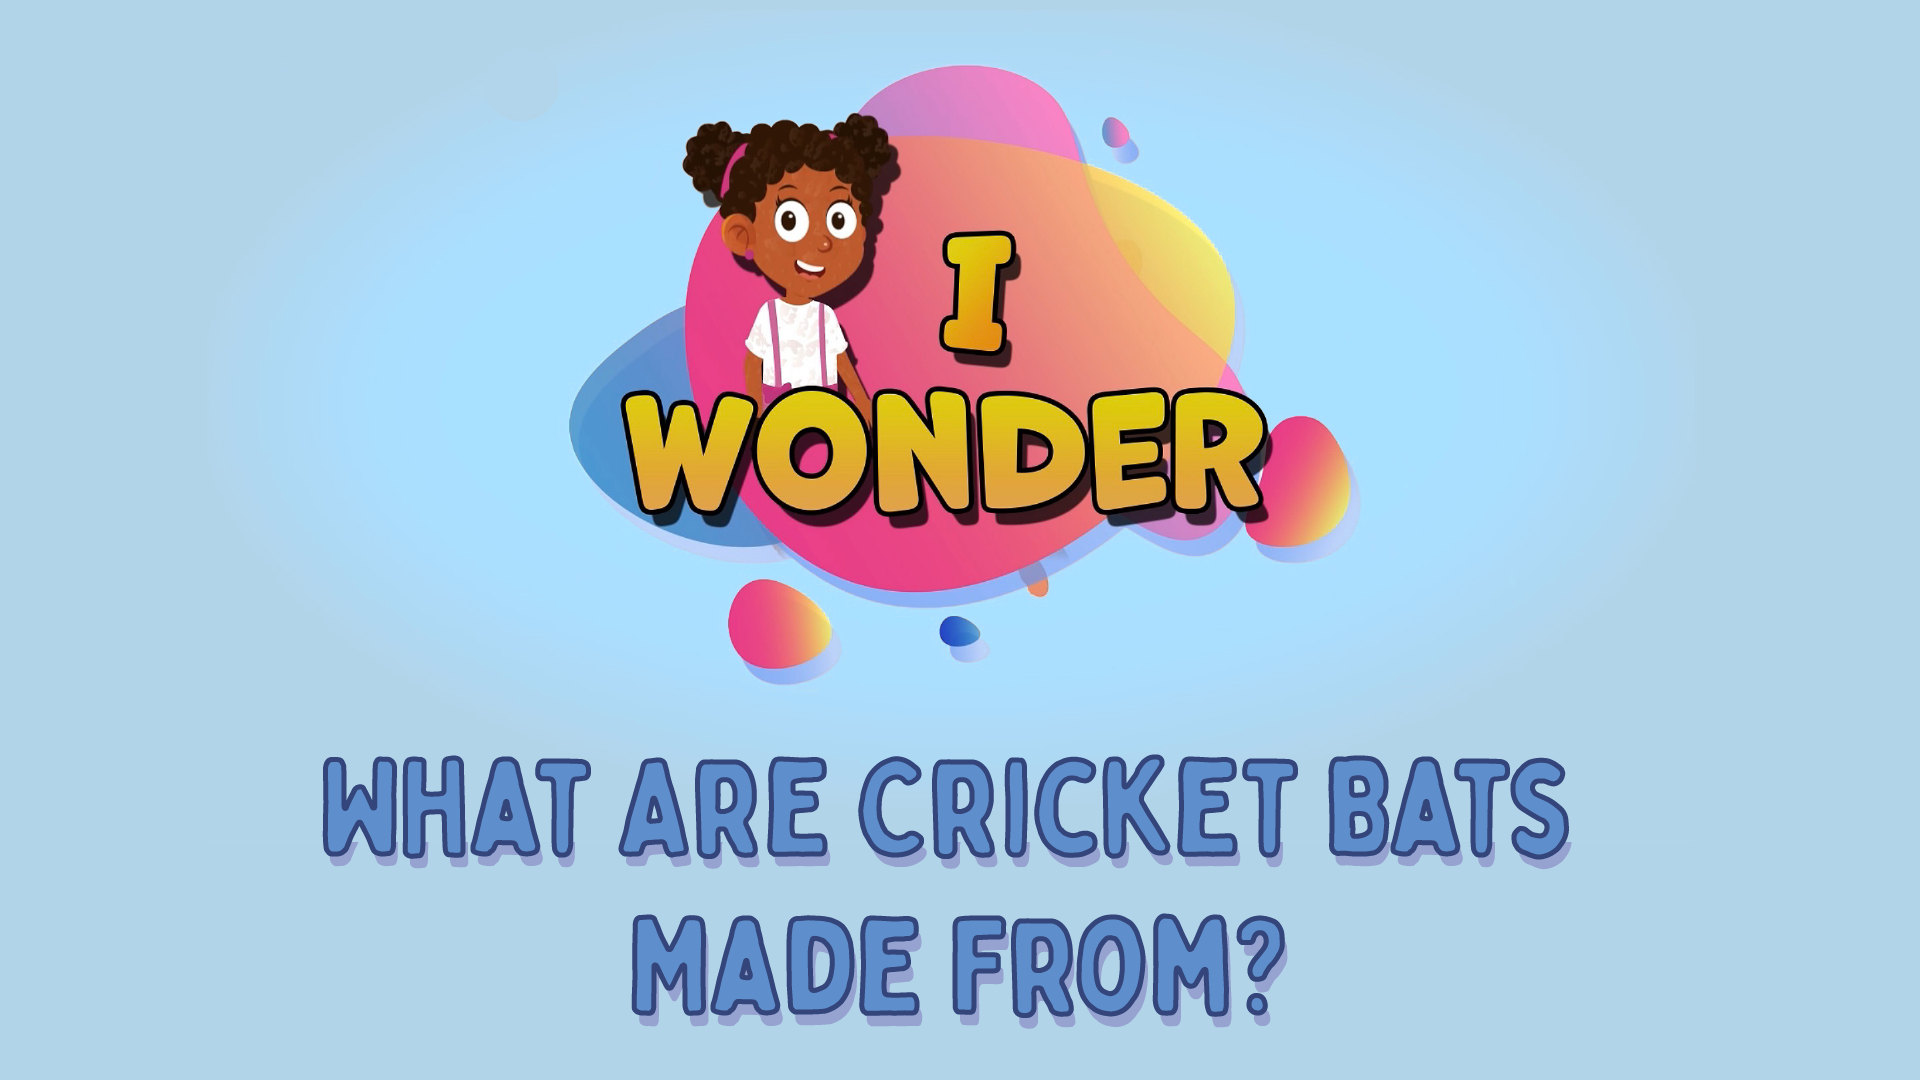 What Are Cricket Bats Made From?